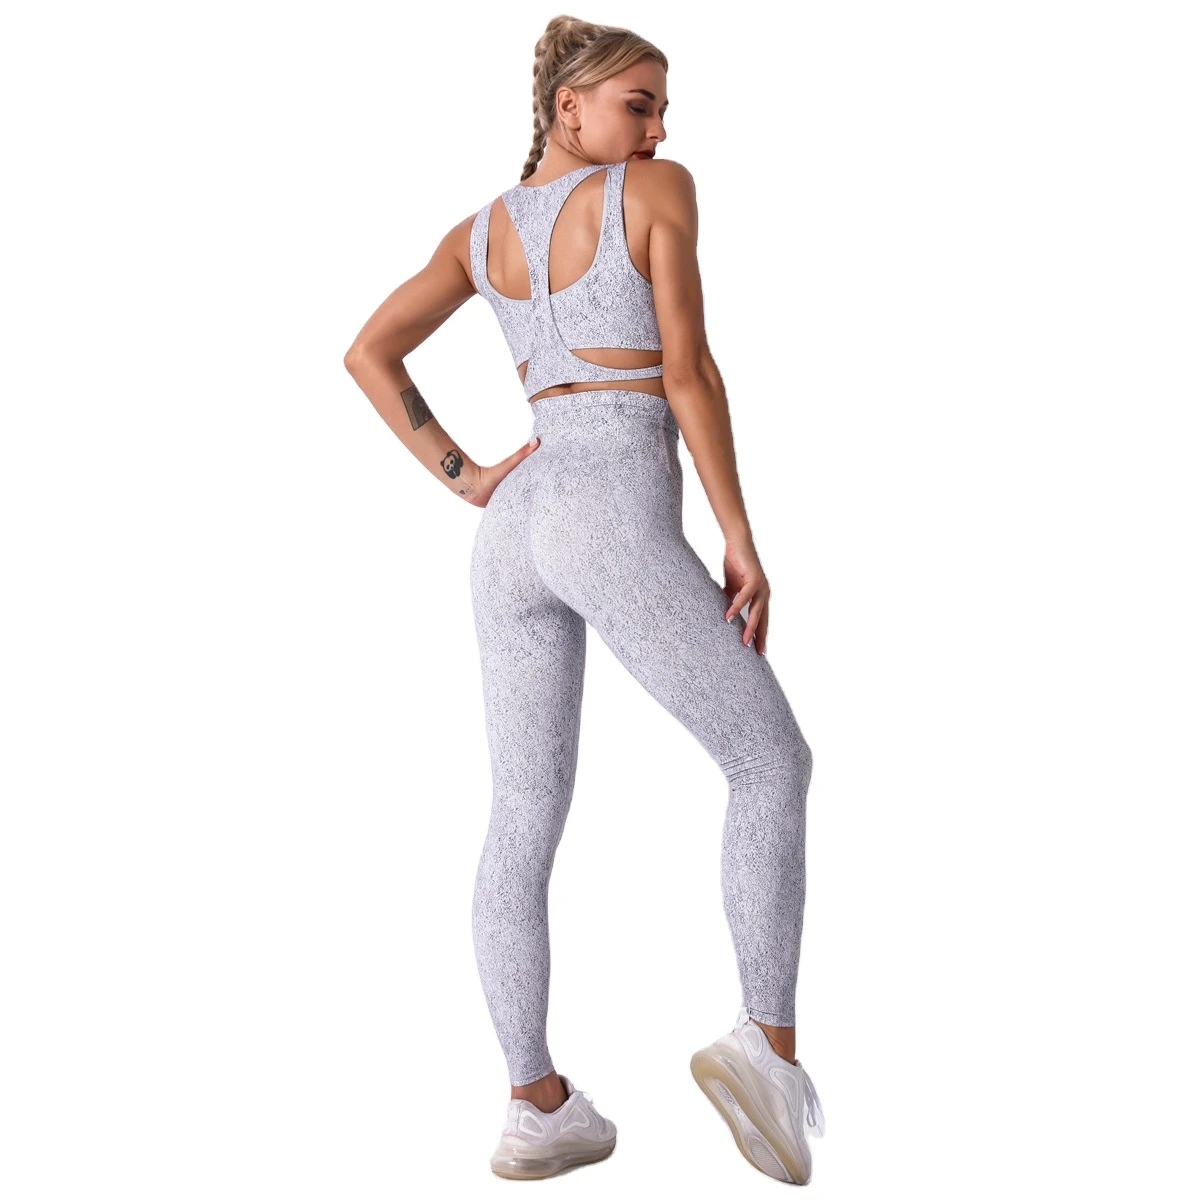 High Quality Sport Fitness Clothing Sportswear Yoga Fitness Woman 2-Pieces Yoga Activewear